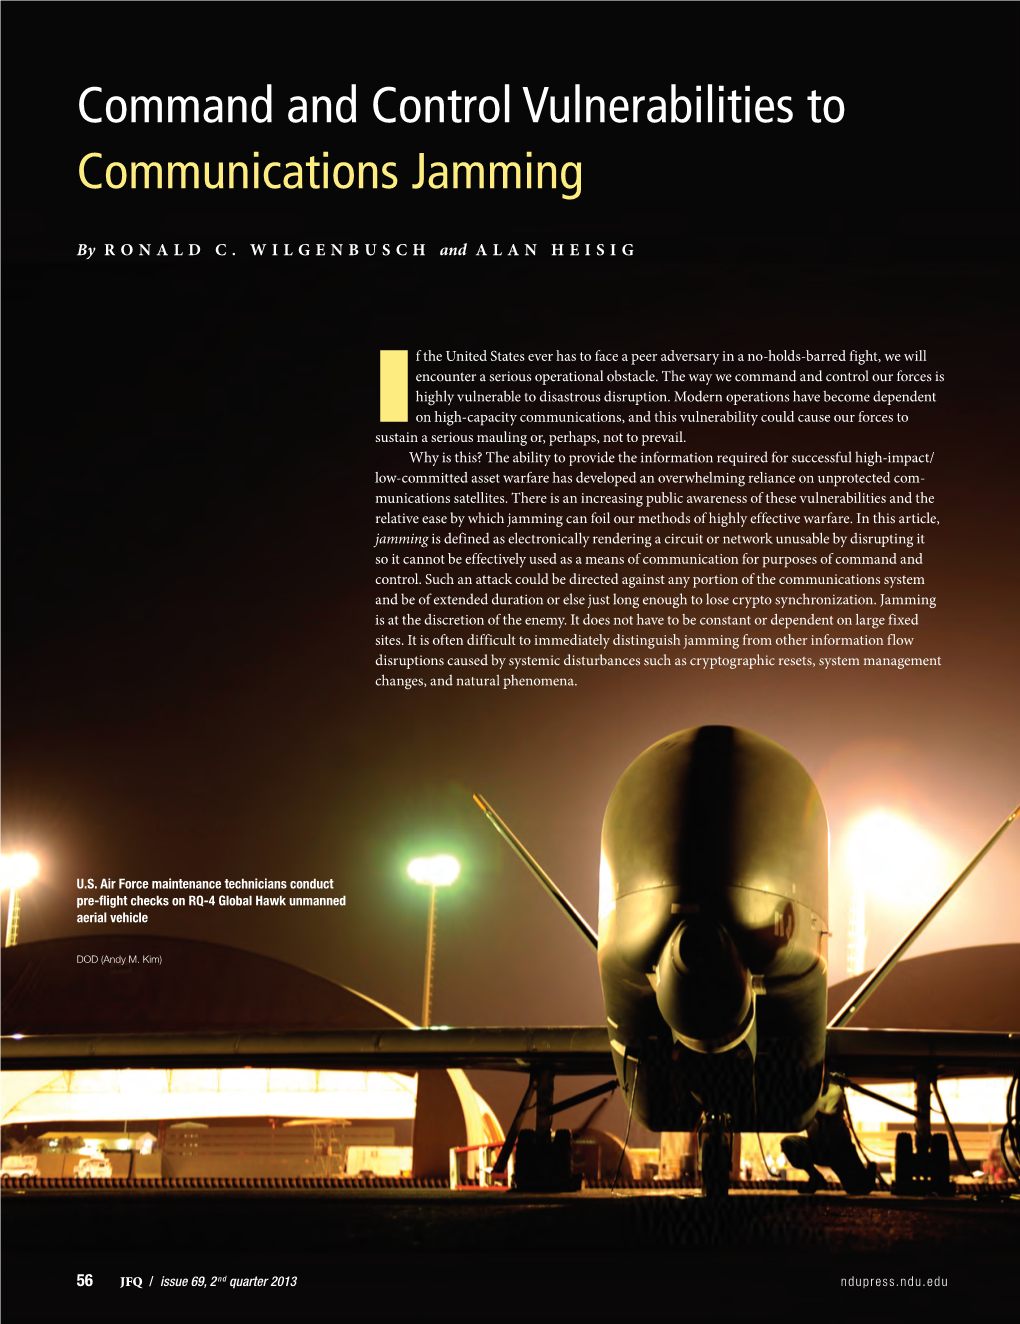 Command and Control Vulnerabilities to Communications Jamming